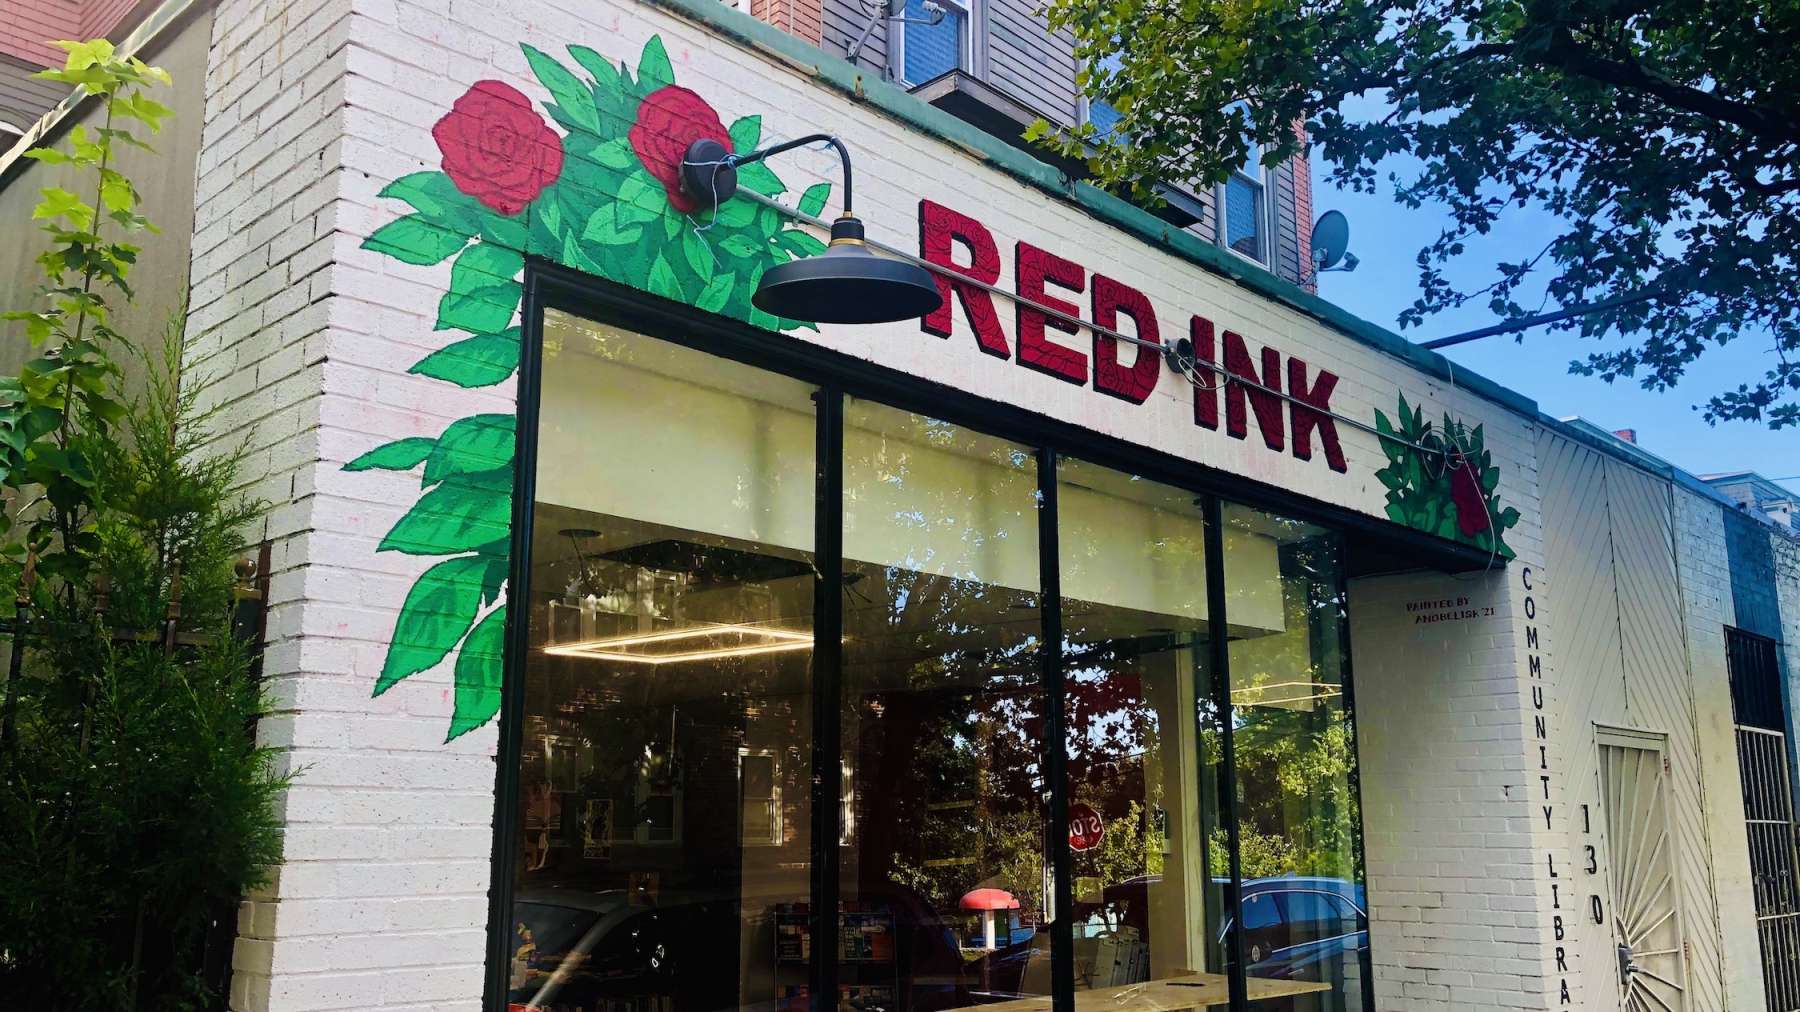 Rhode Island News: Red Ink Community Library, a ‘socially conscious event space and reading room’ opens Saturday